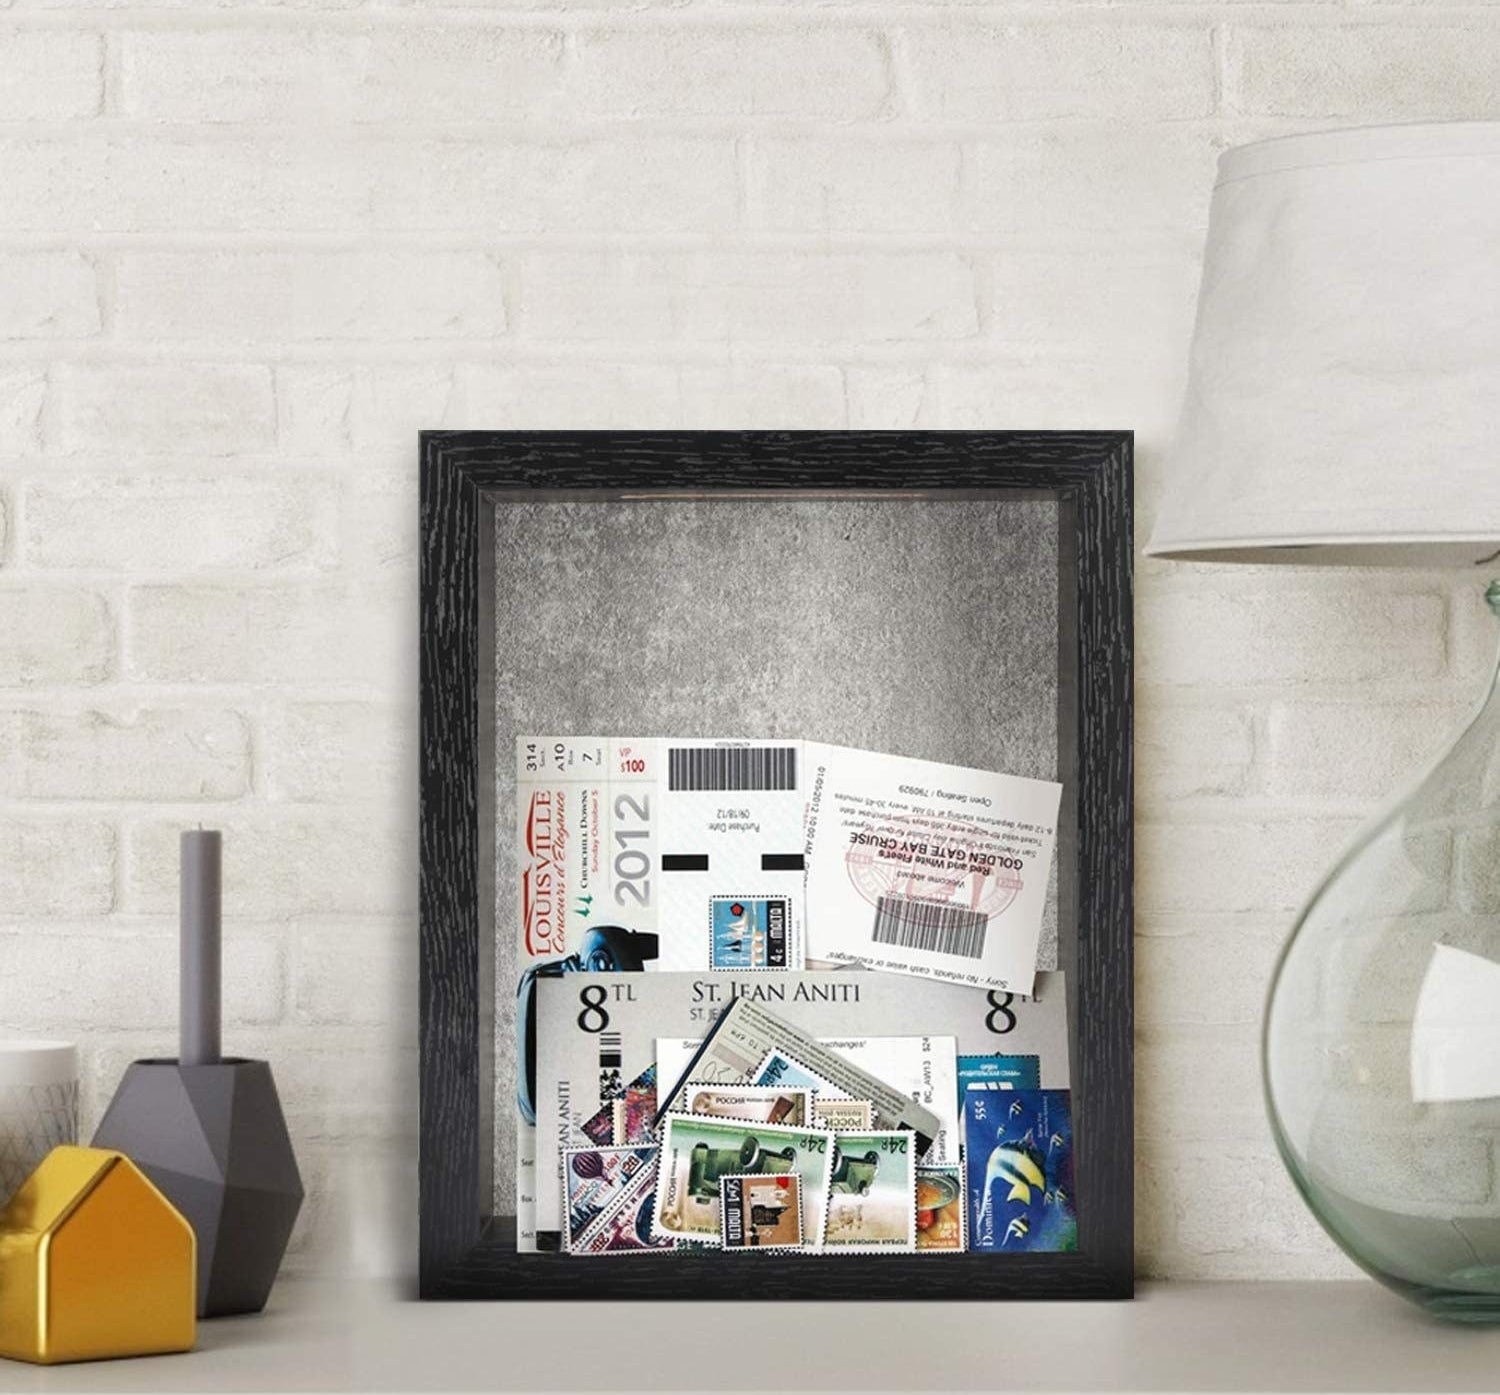 The shadow box perched on a sideboard and filled with ticket stubs and photographs